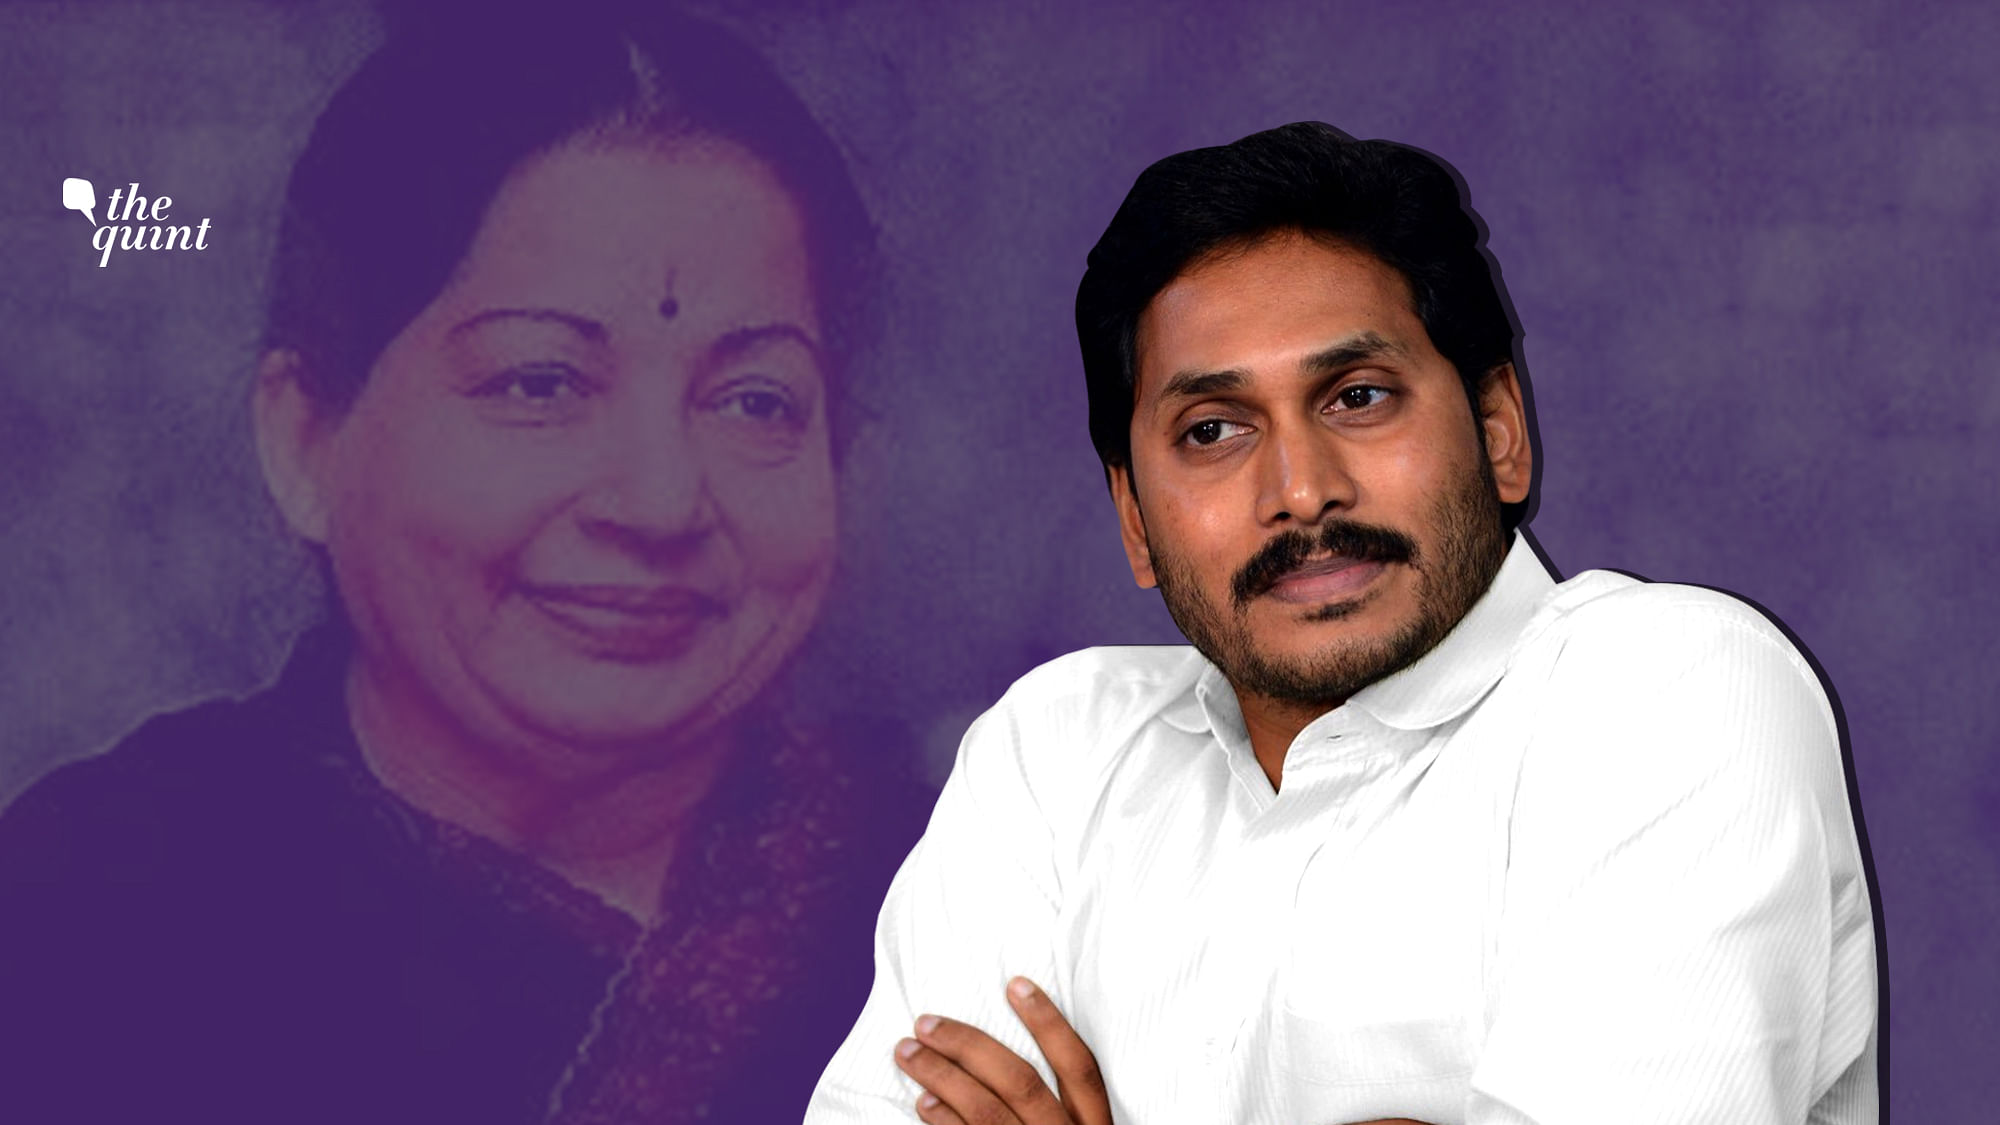 Is Jagan going the Jayalalithaa way? Image used for representational purposes.